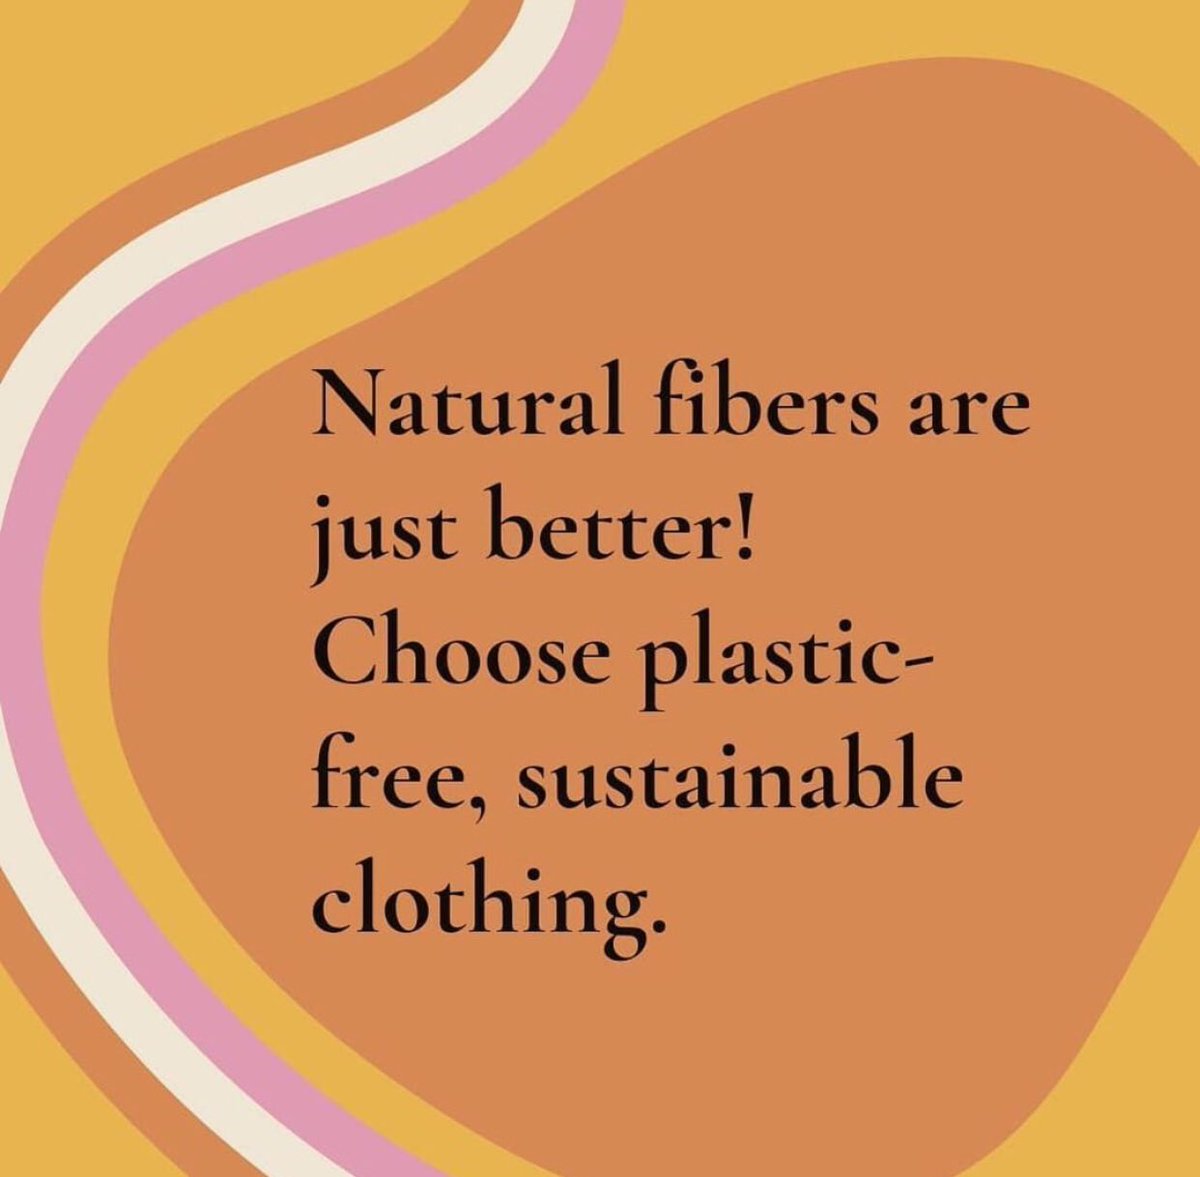 Natural fibers are truly just better! 

What’s your favorite natural fiber to wear?

#naturalfibers #organic #sustainable #sustainablefashion